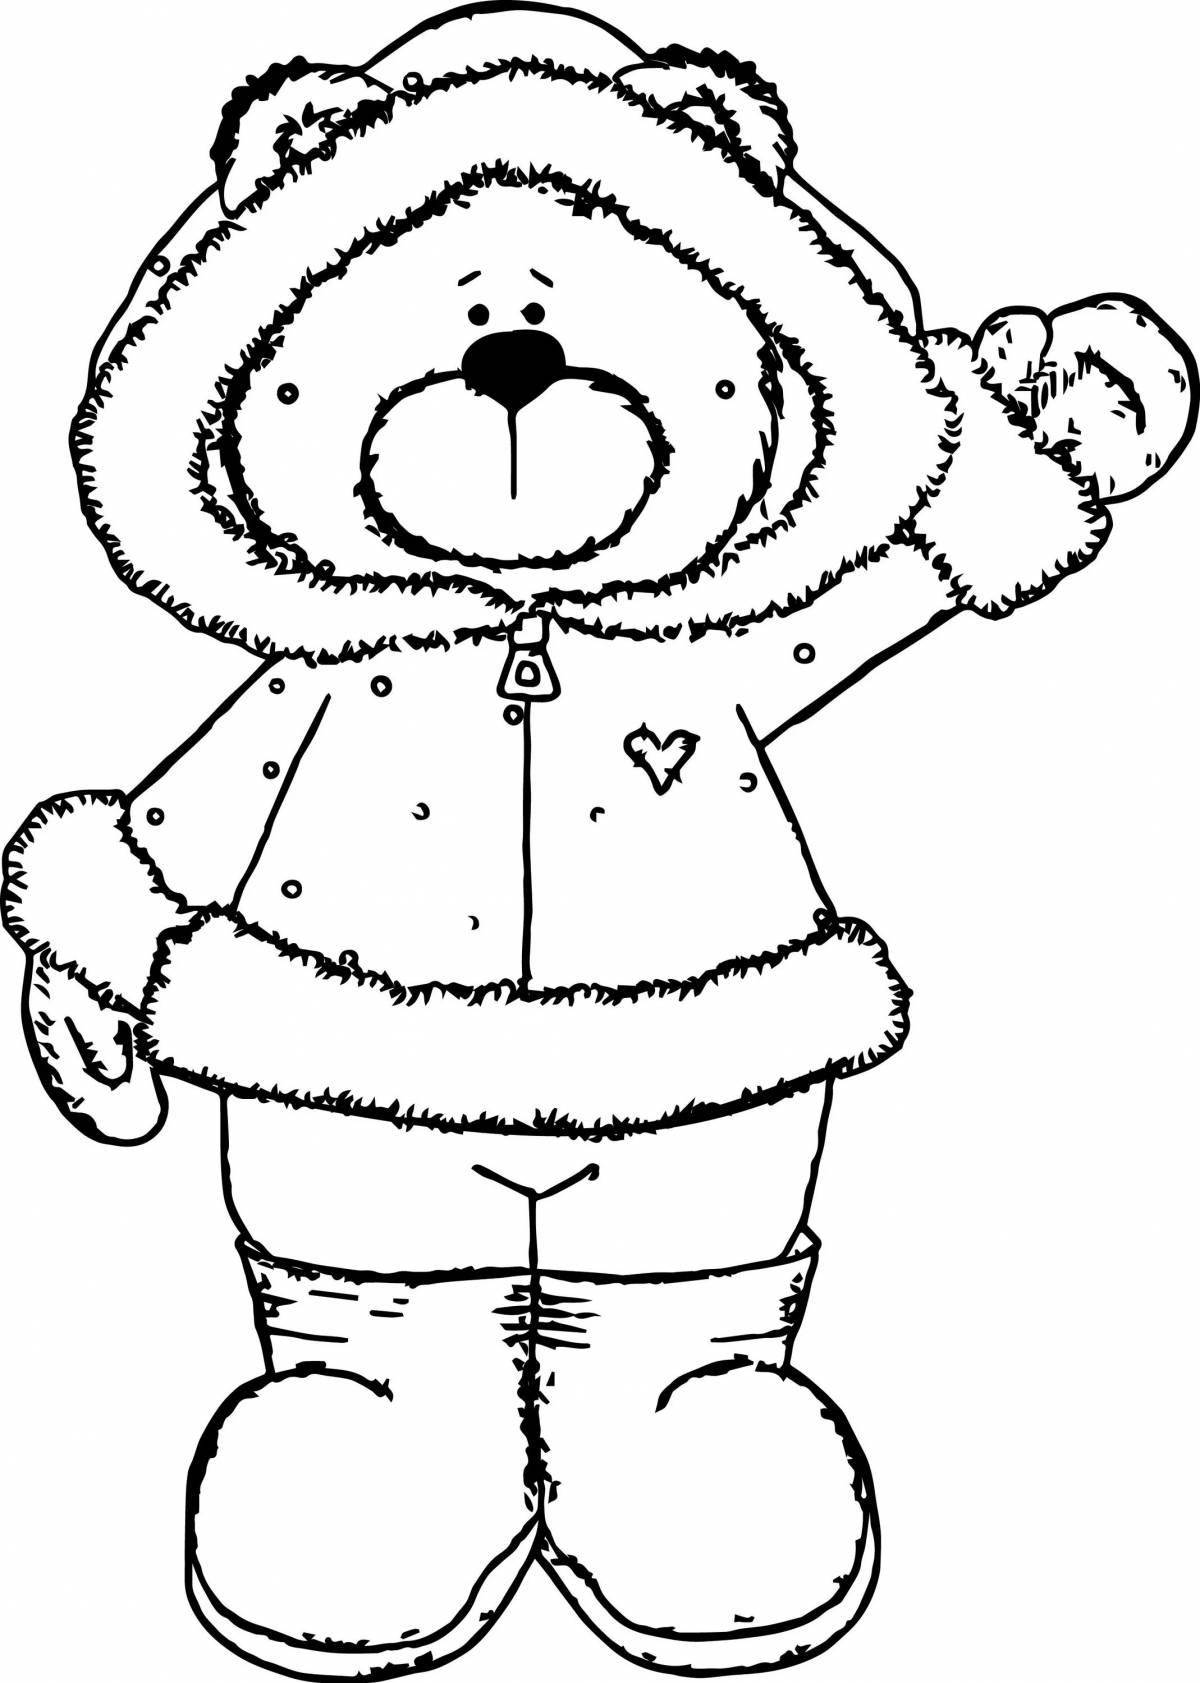 Playful bear with clothes